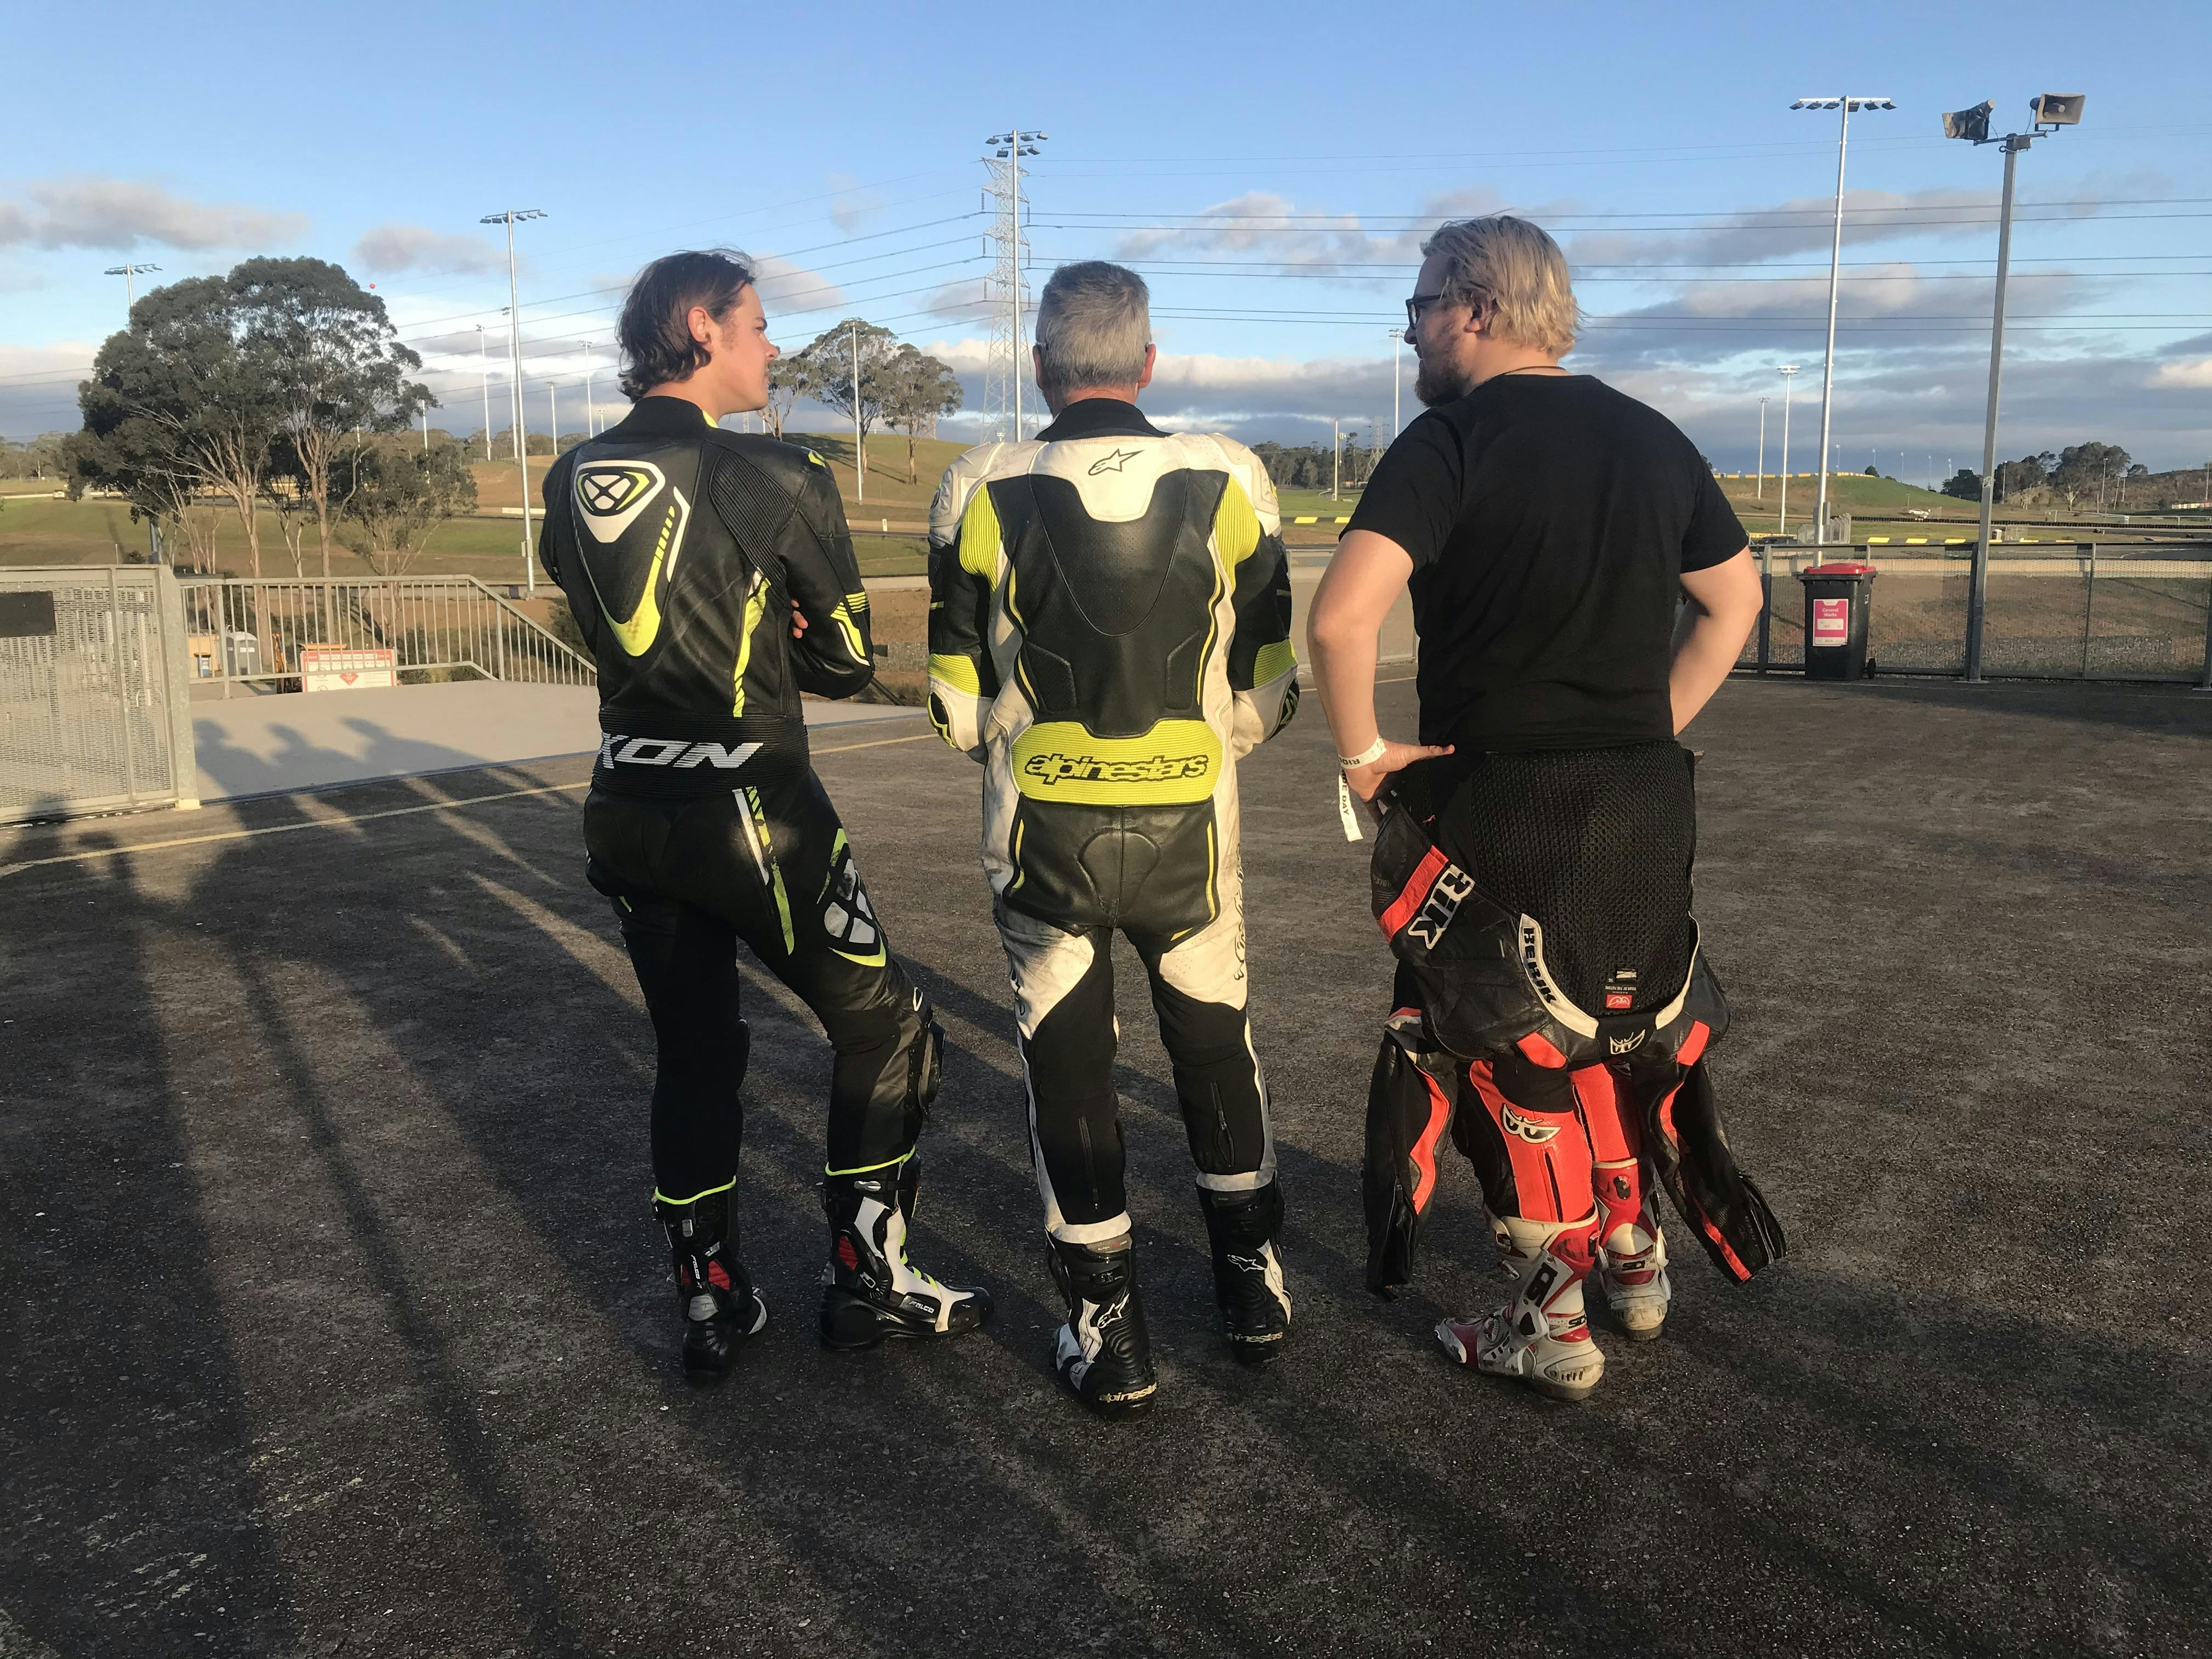 3 guys in leather suits at a race track